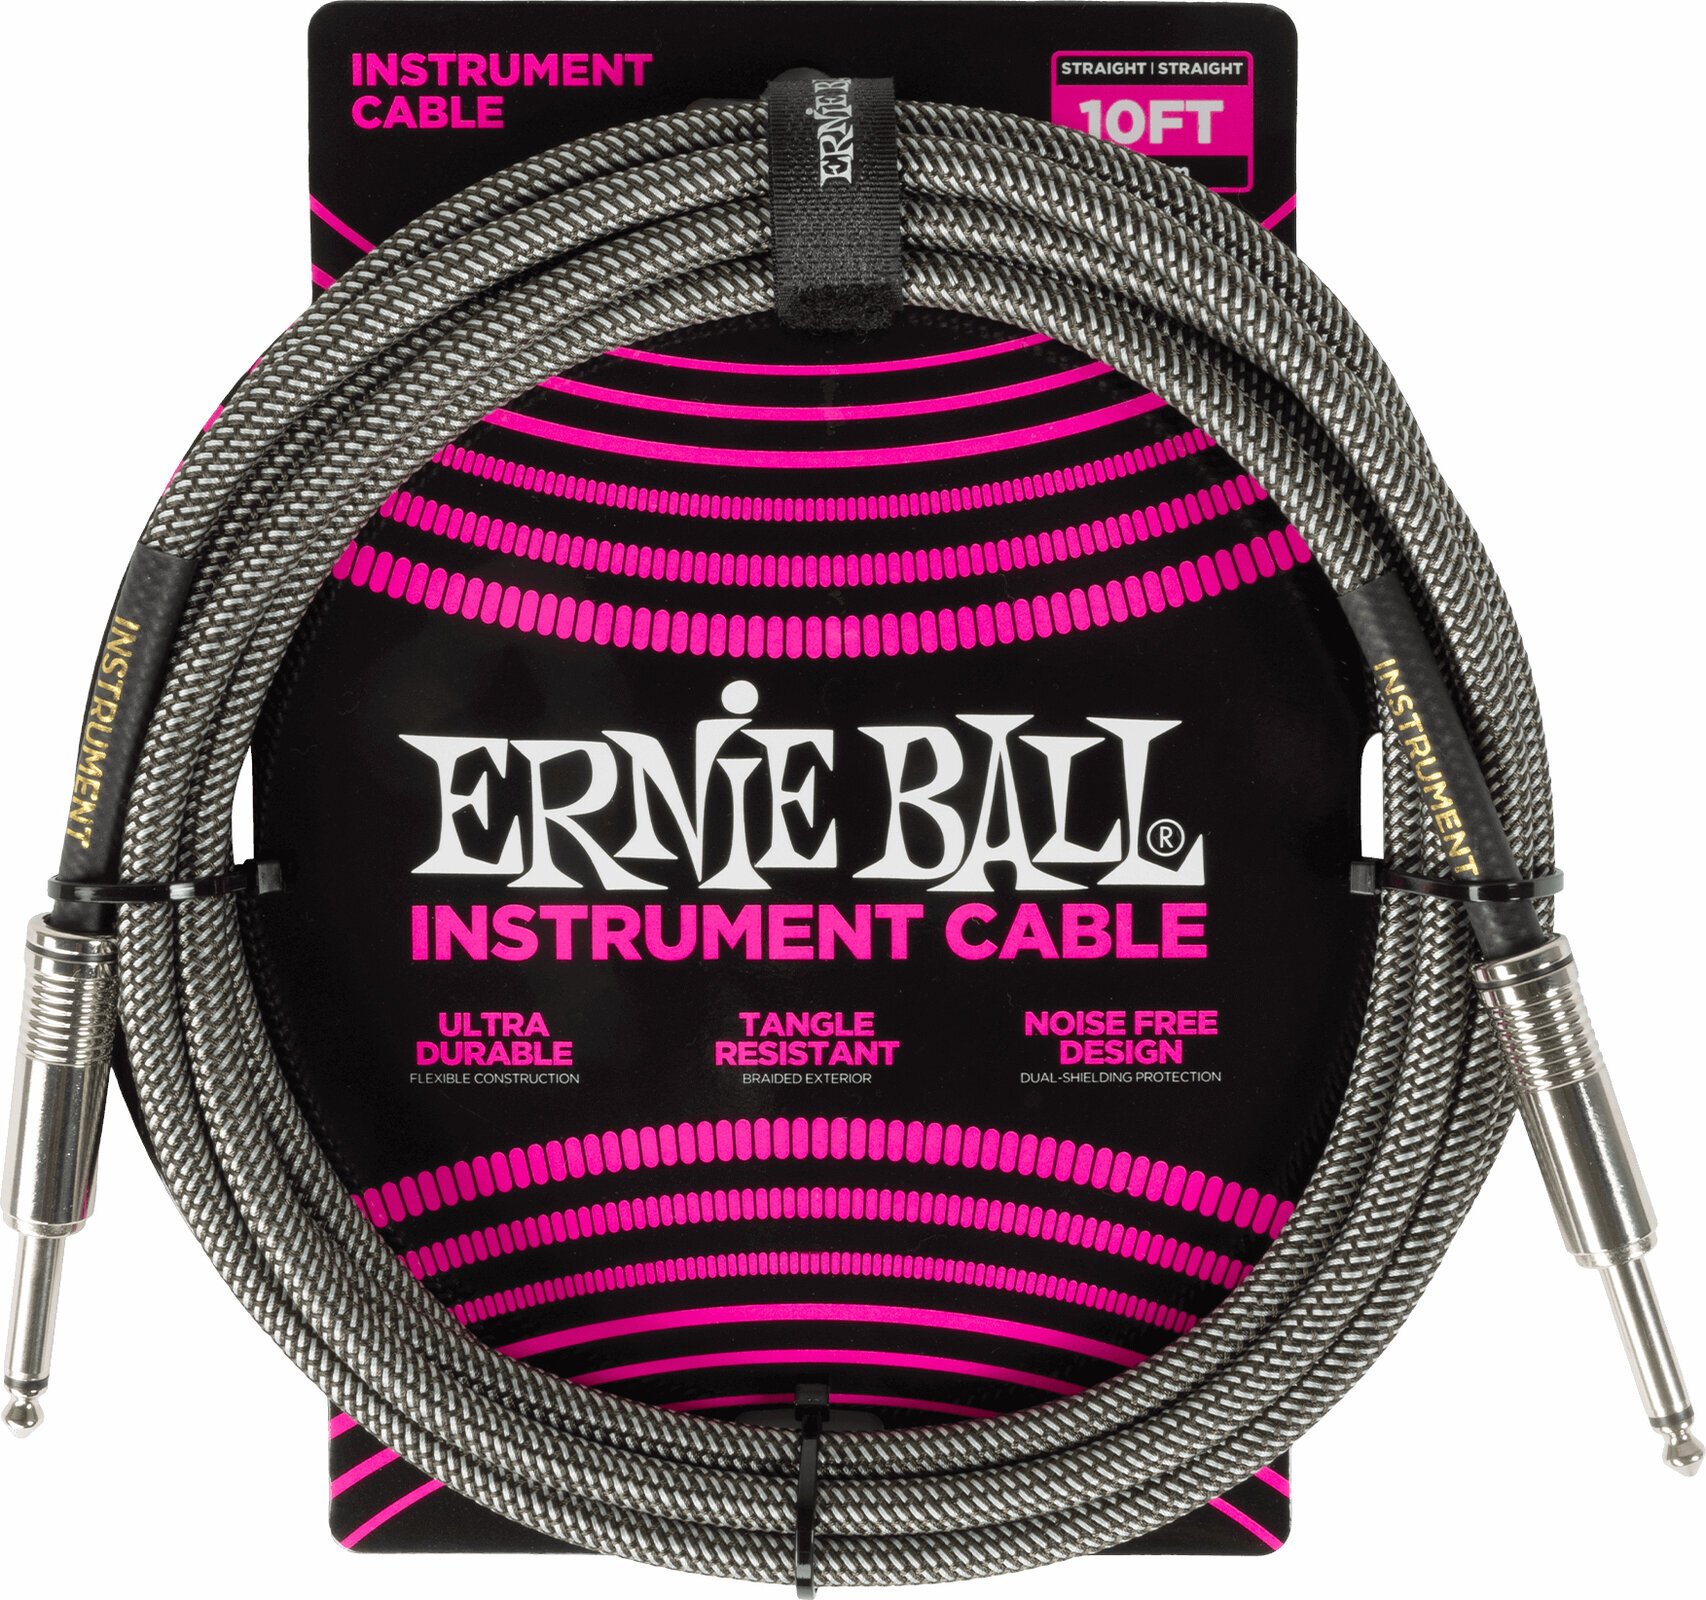 Instrument Cable Ernie Ball Braided Instrument Cable Straight/Straight Silver 3 m Straight - Straight